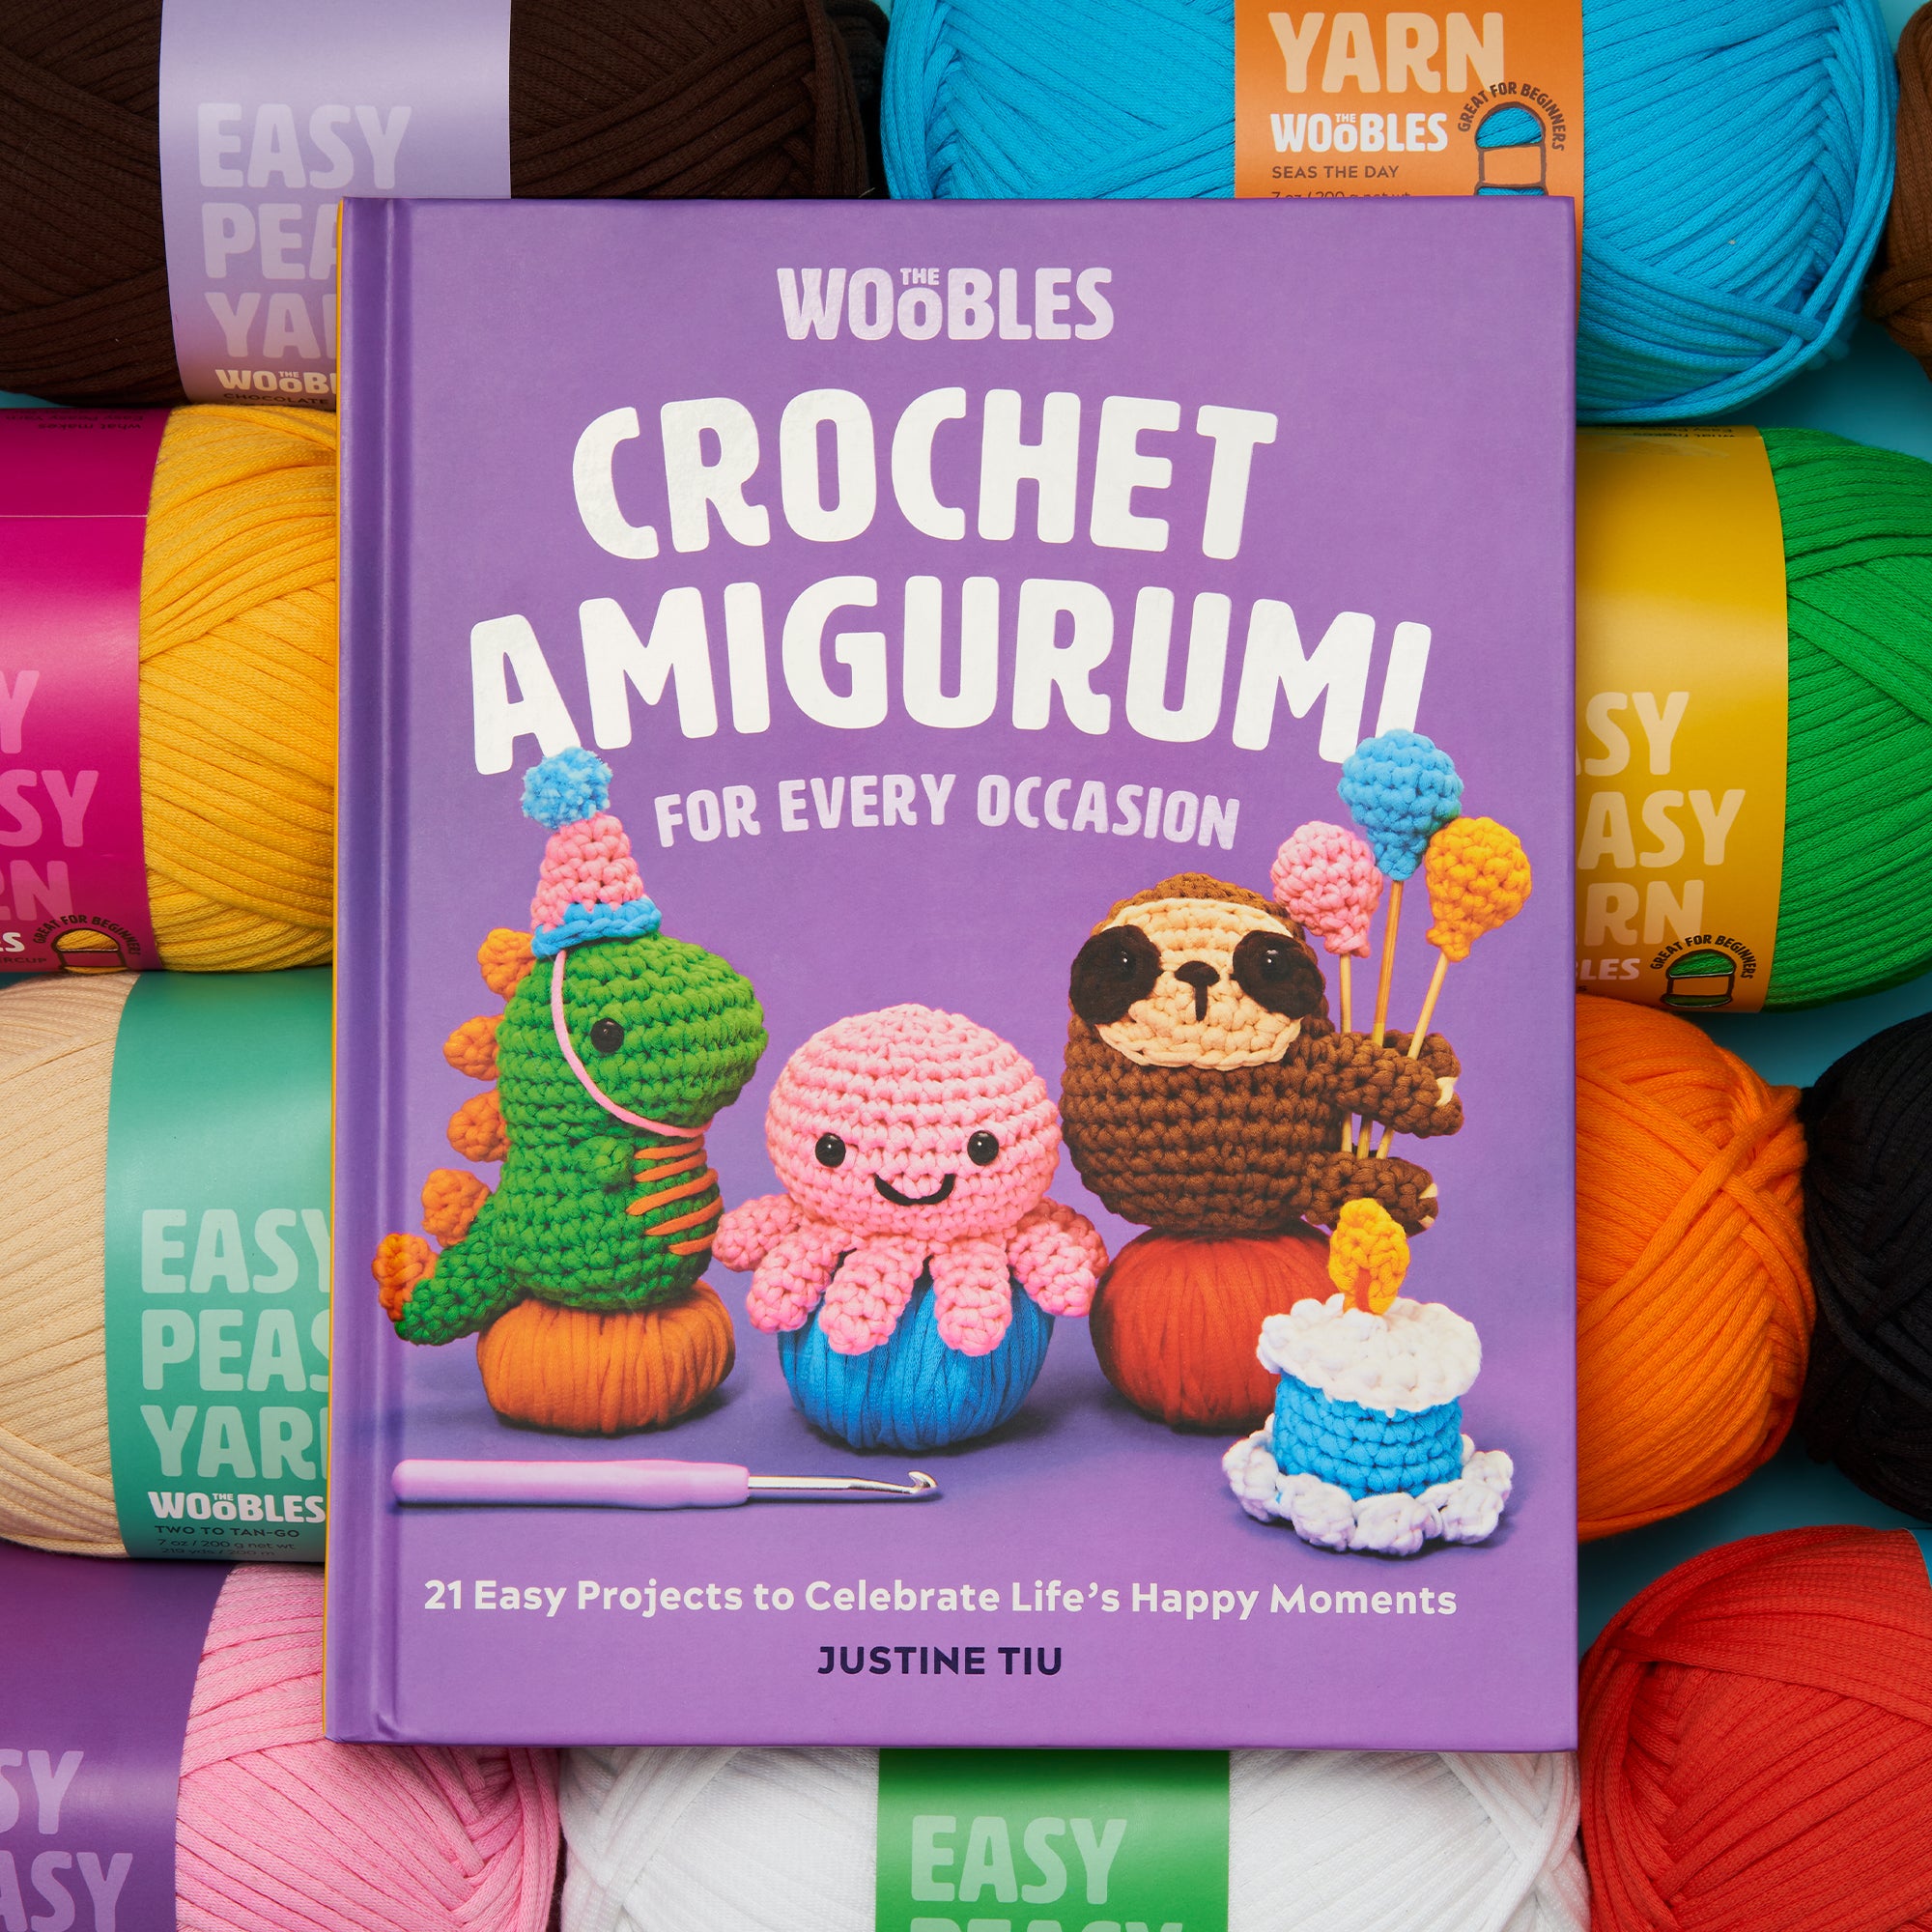 Keep Calm and Carry Yarn Bundle for Beginners | The Woobles